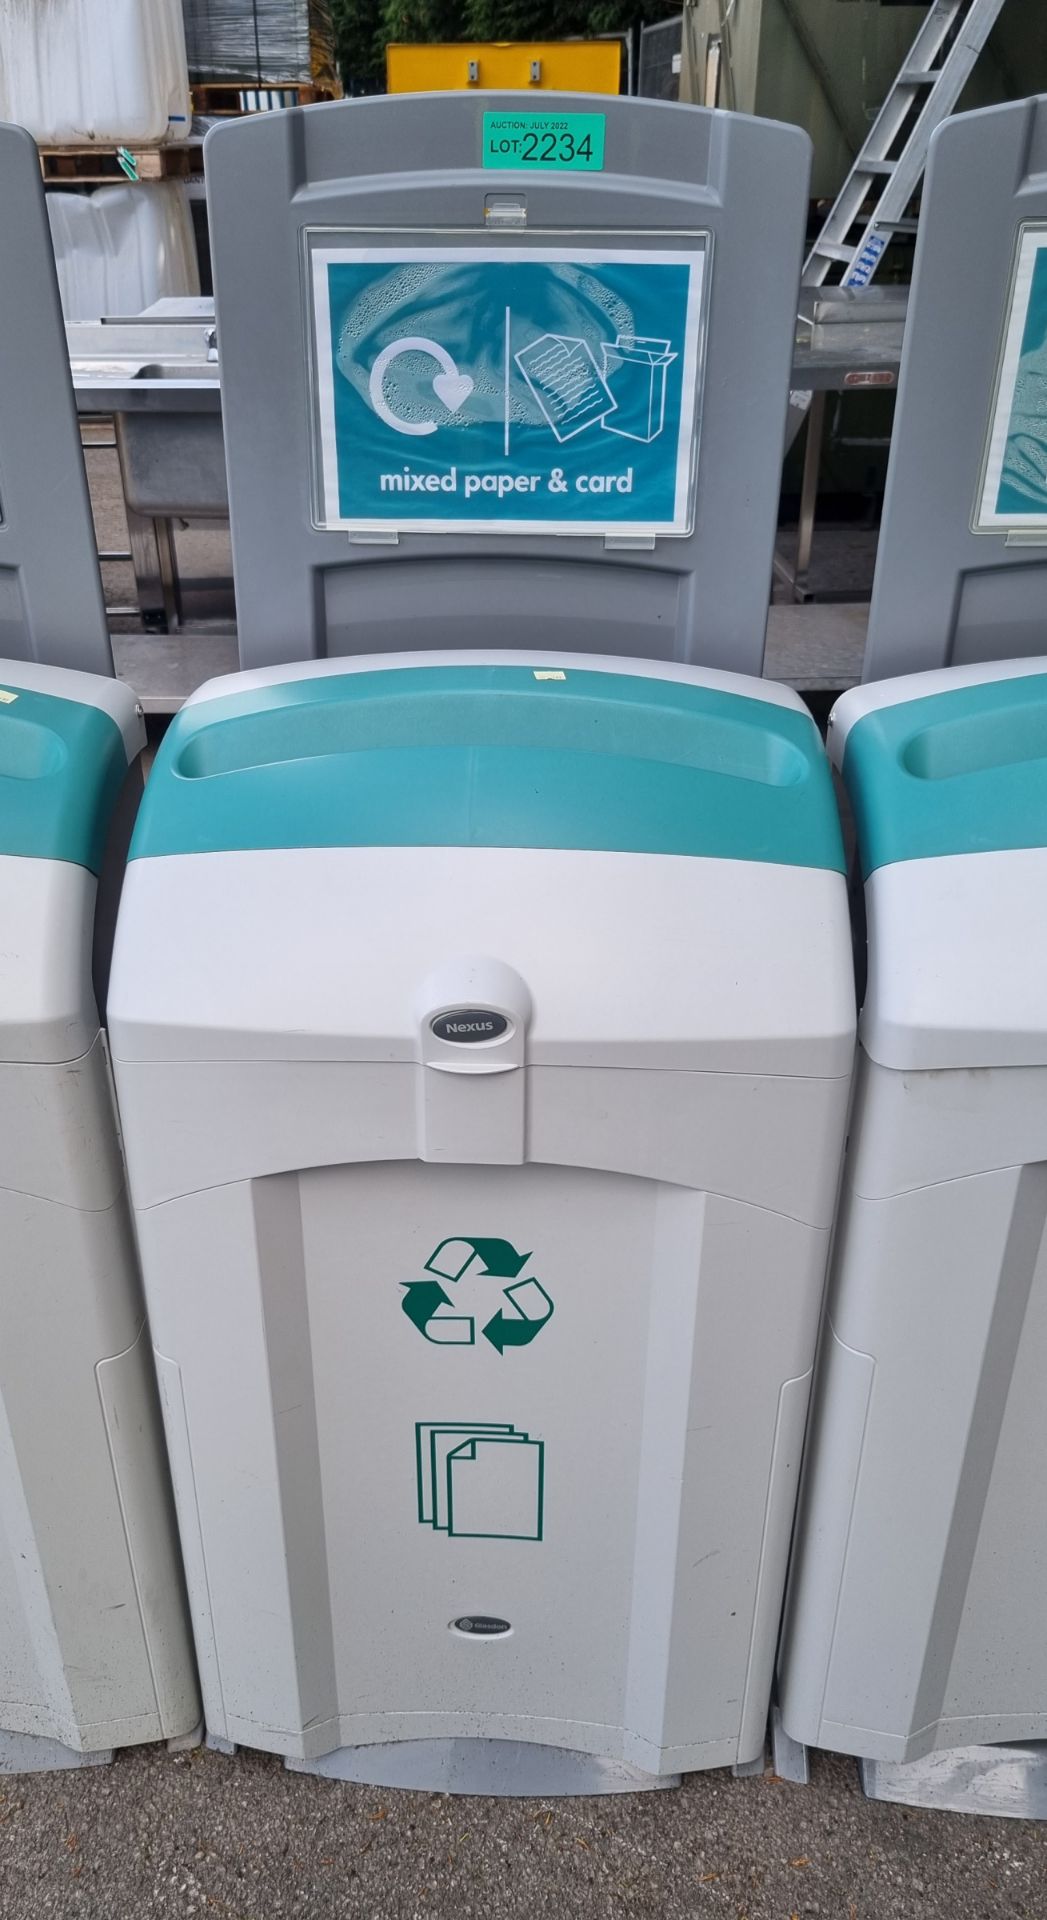 Plastic recycle bin (paper only) - aqua green and grey - Image 2 of 2